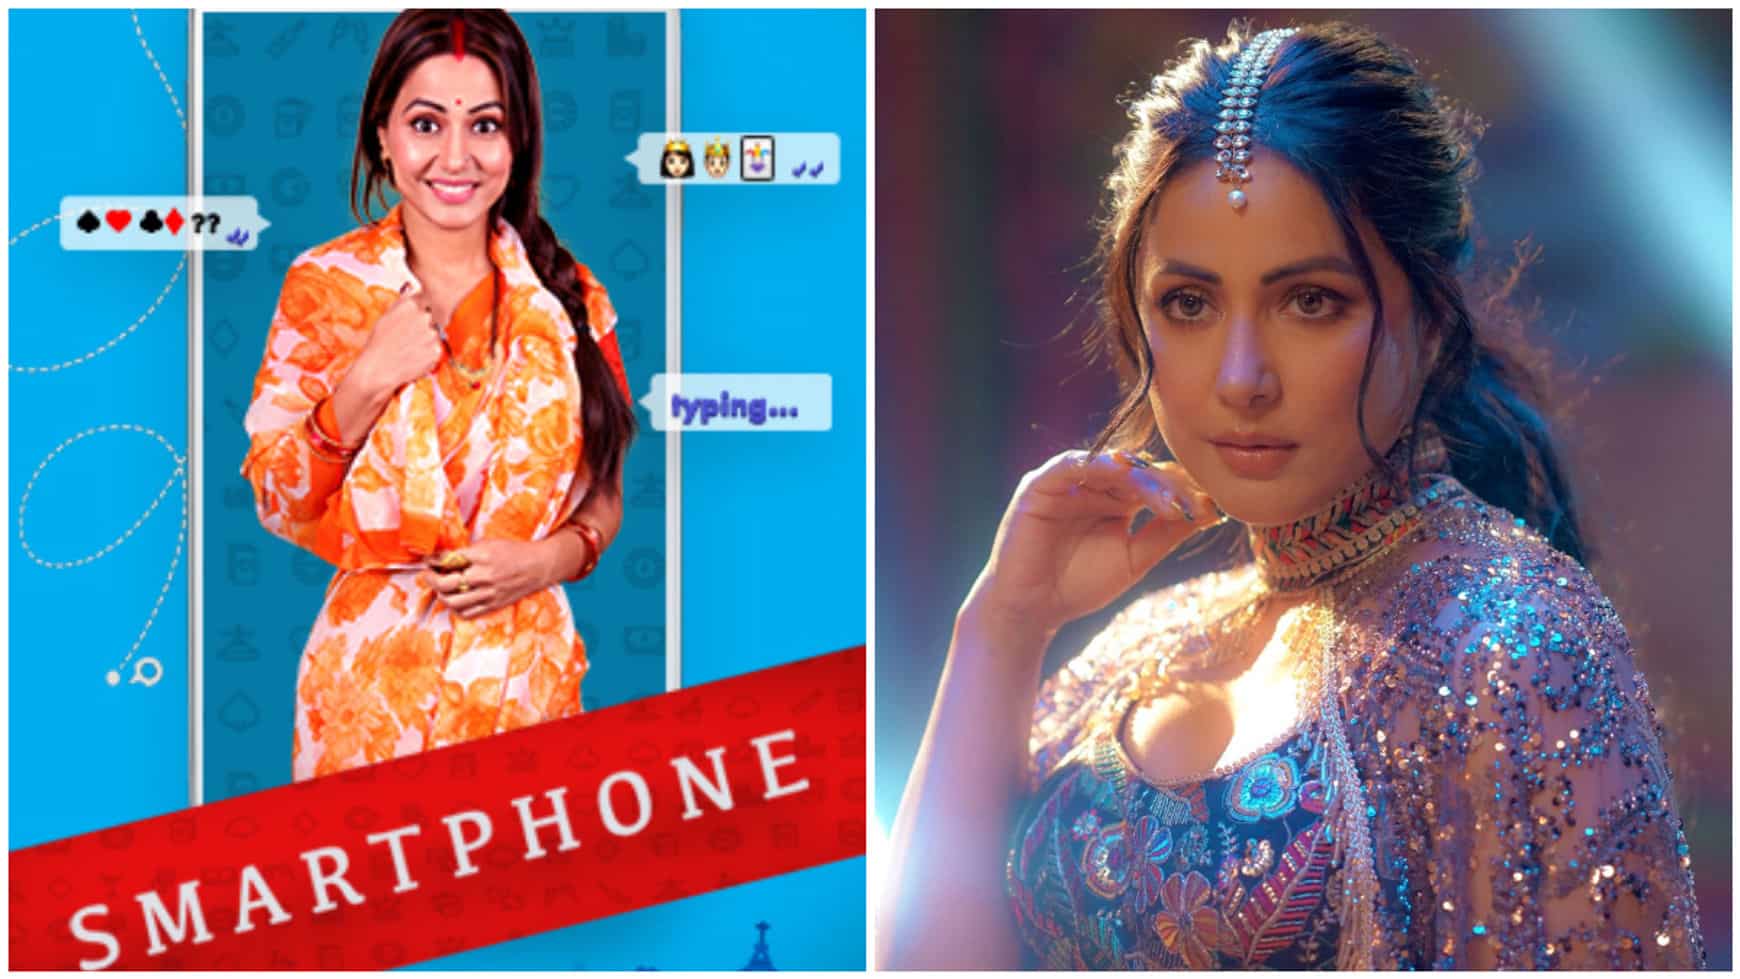 Do you know about Hina Khan's short film, Smartphone? Here's all about it and where you can stream it